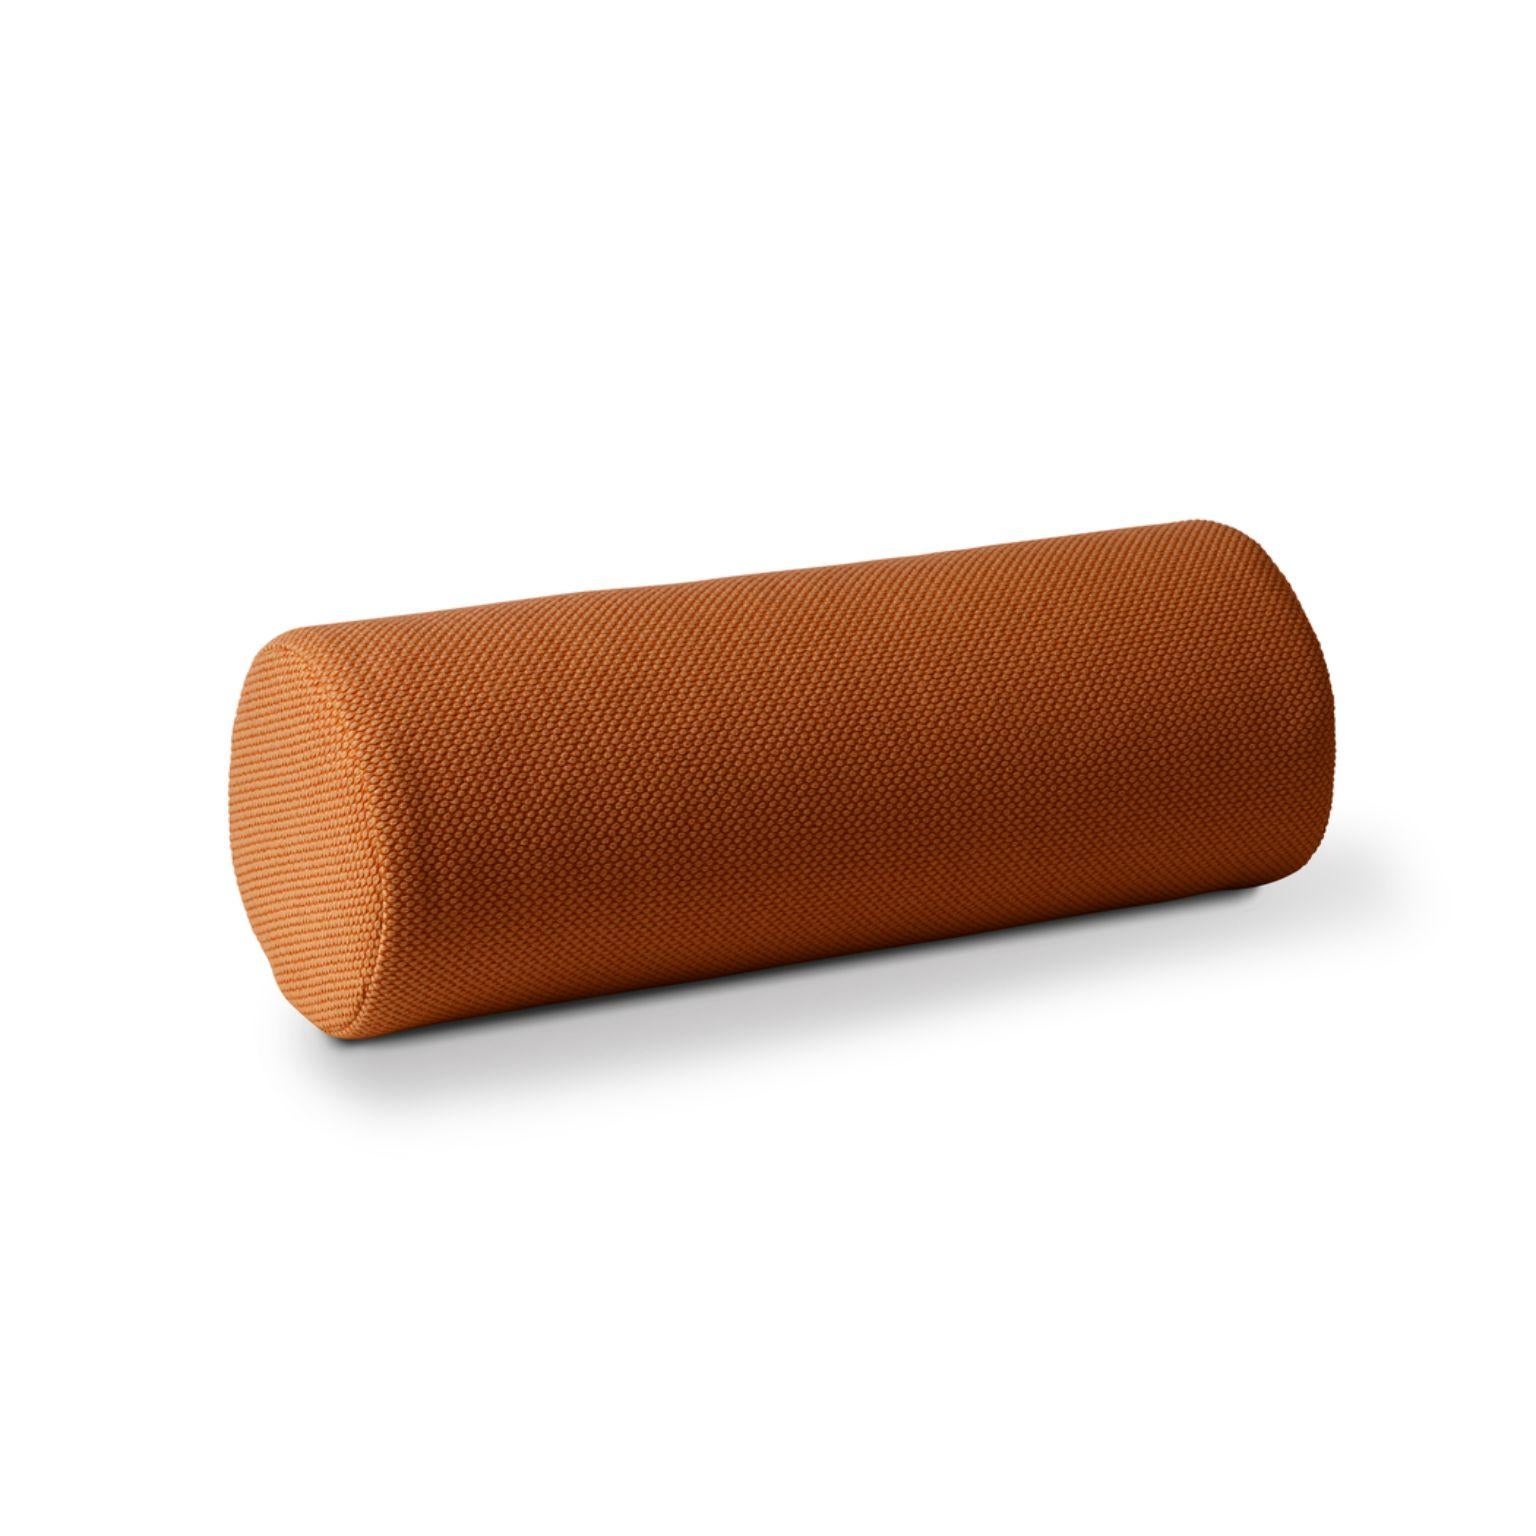 Galore cushion terracotta by Warm Nordic
Dimensions: D 16 x H 46 cm
Material: Textile upholstery, Granulate and feathers filling.
Weight: 0.9 kg
Also available in different colors and finishes. 

An elegant bolster cushion, which matches the